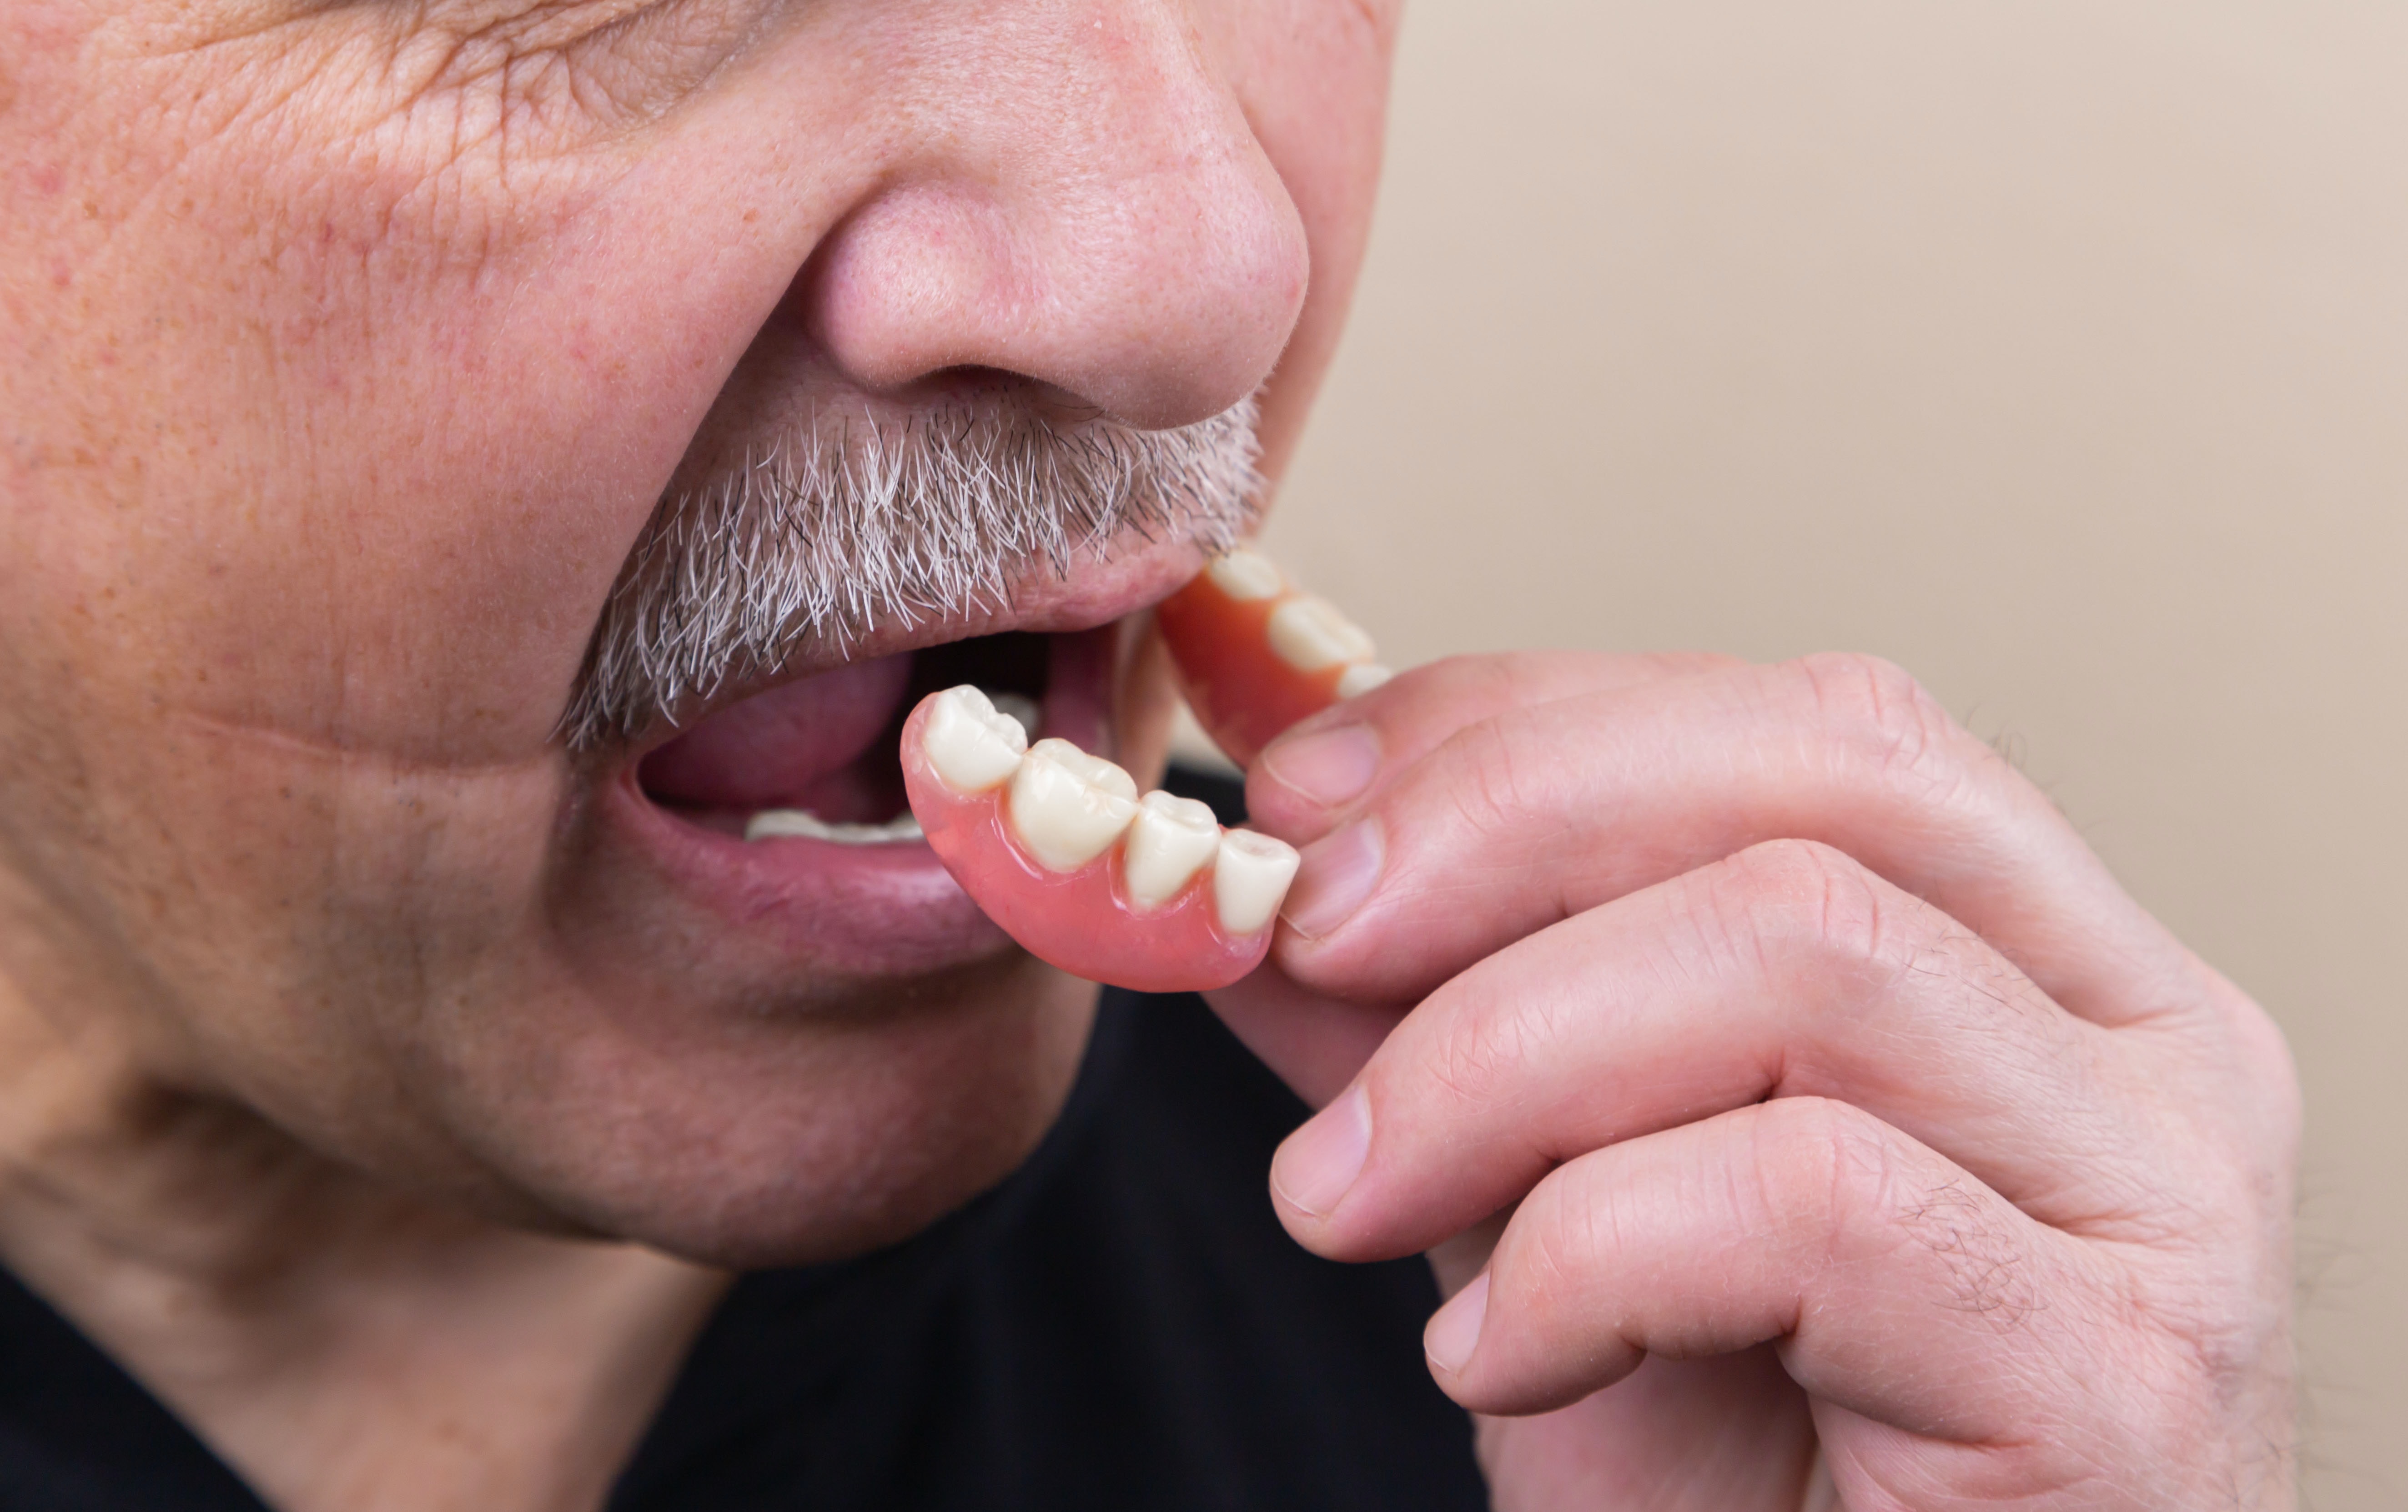 Why are Dentures so Important to Your Oral Health?